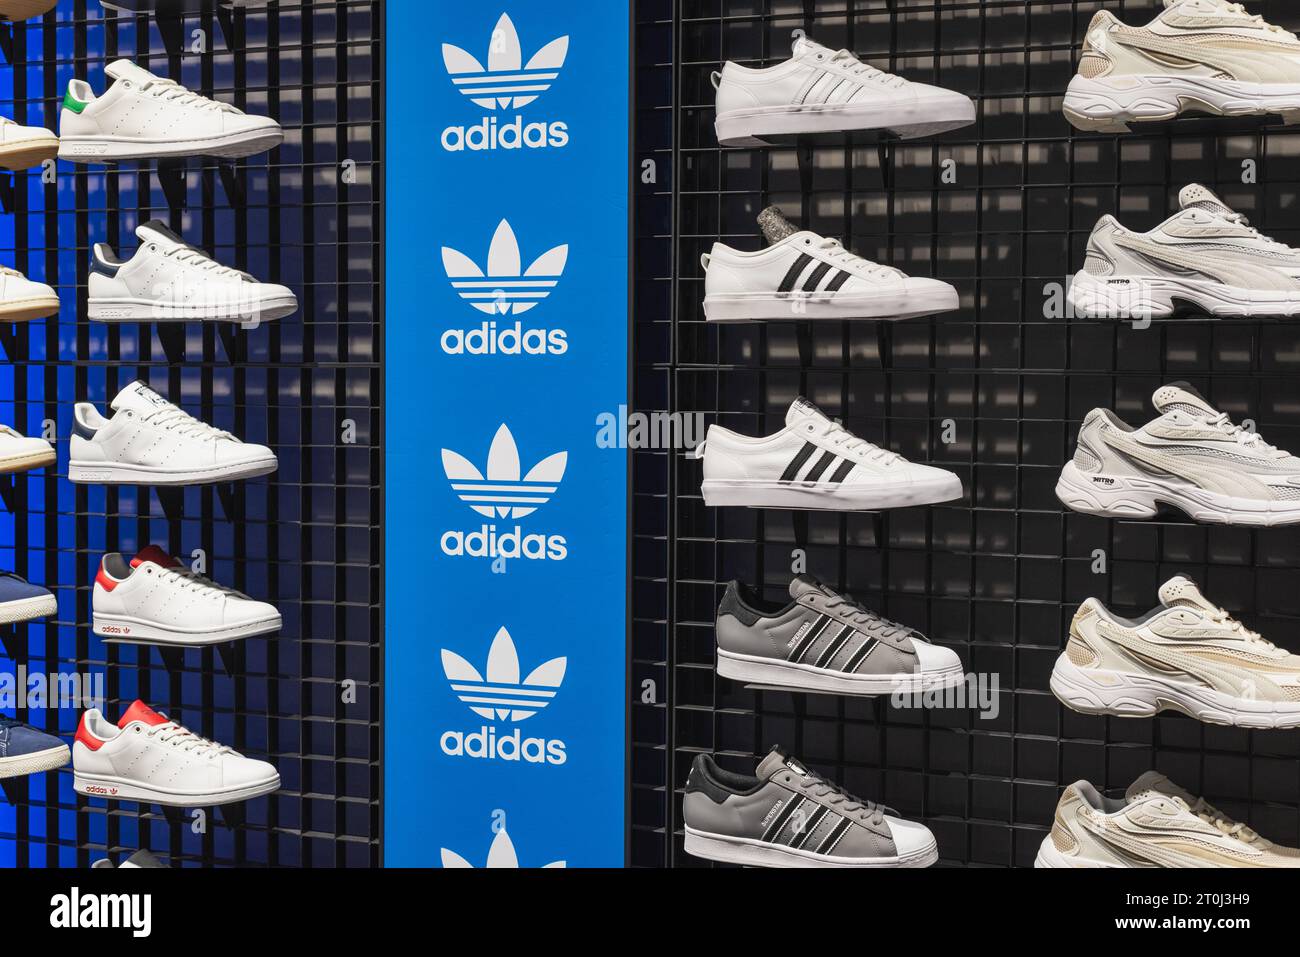 Bangkok, Thailand - September 17, 2023: a stand with Adidas and Puma Nitro sneakers decorated with Adidas logos. Stock Photo